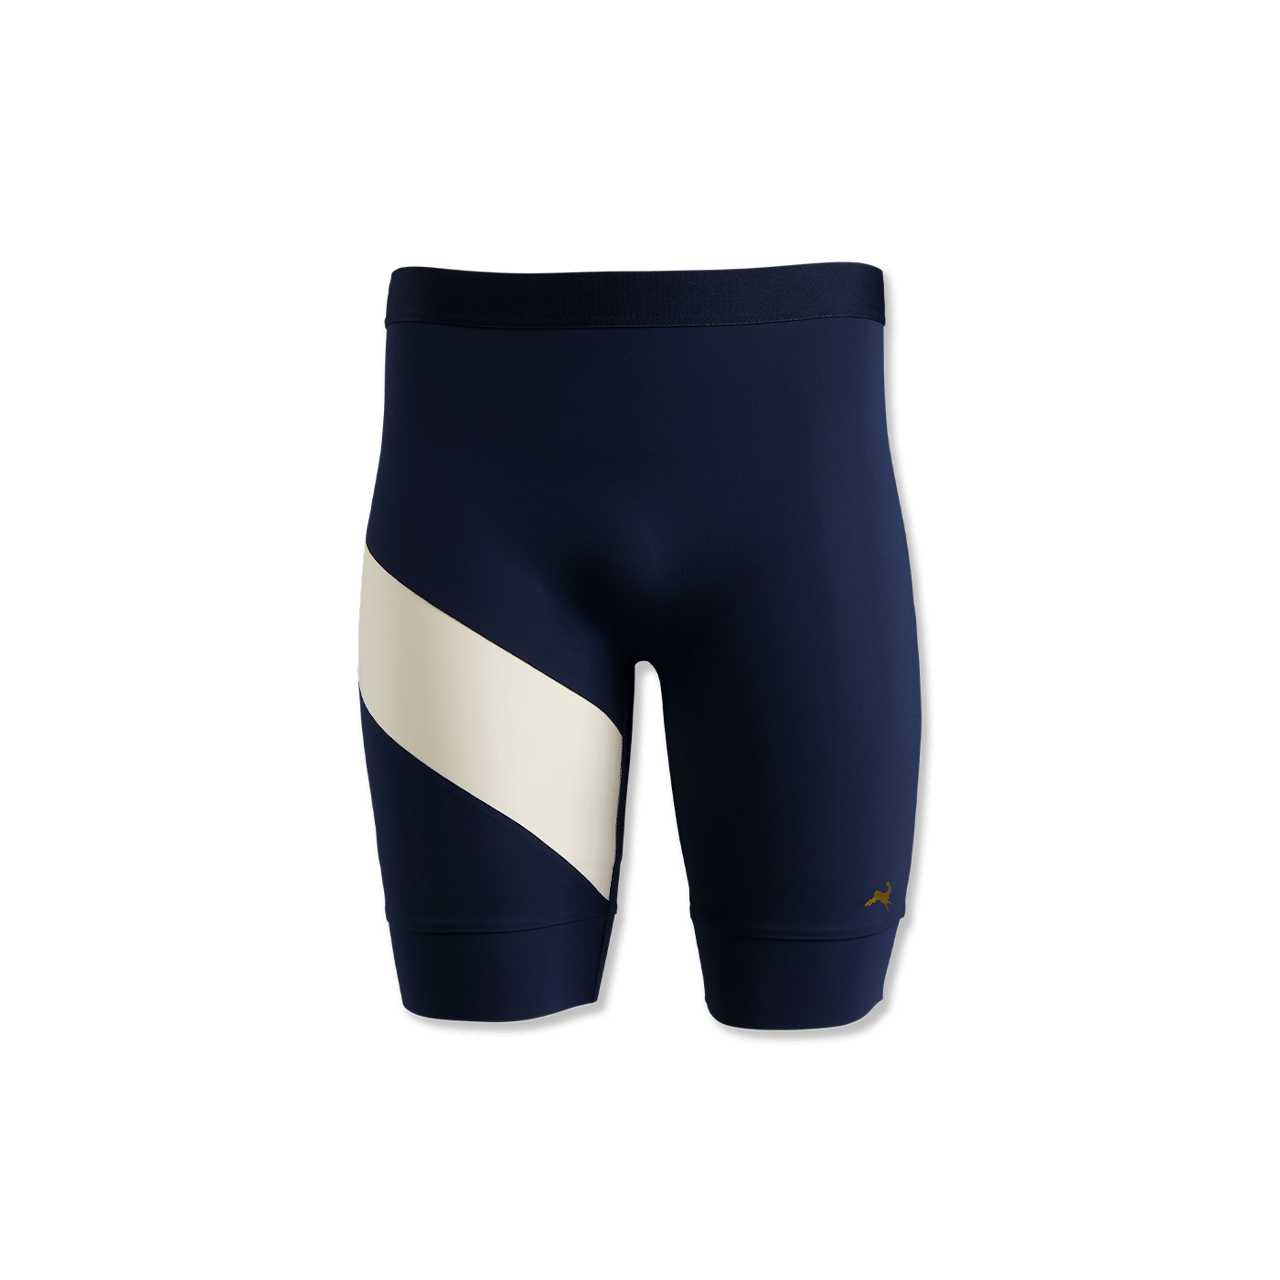 Unlined / Navy/Ivory / S